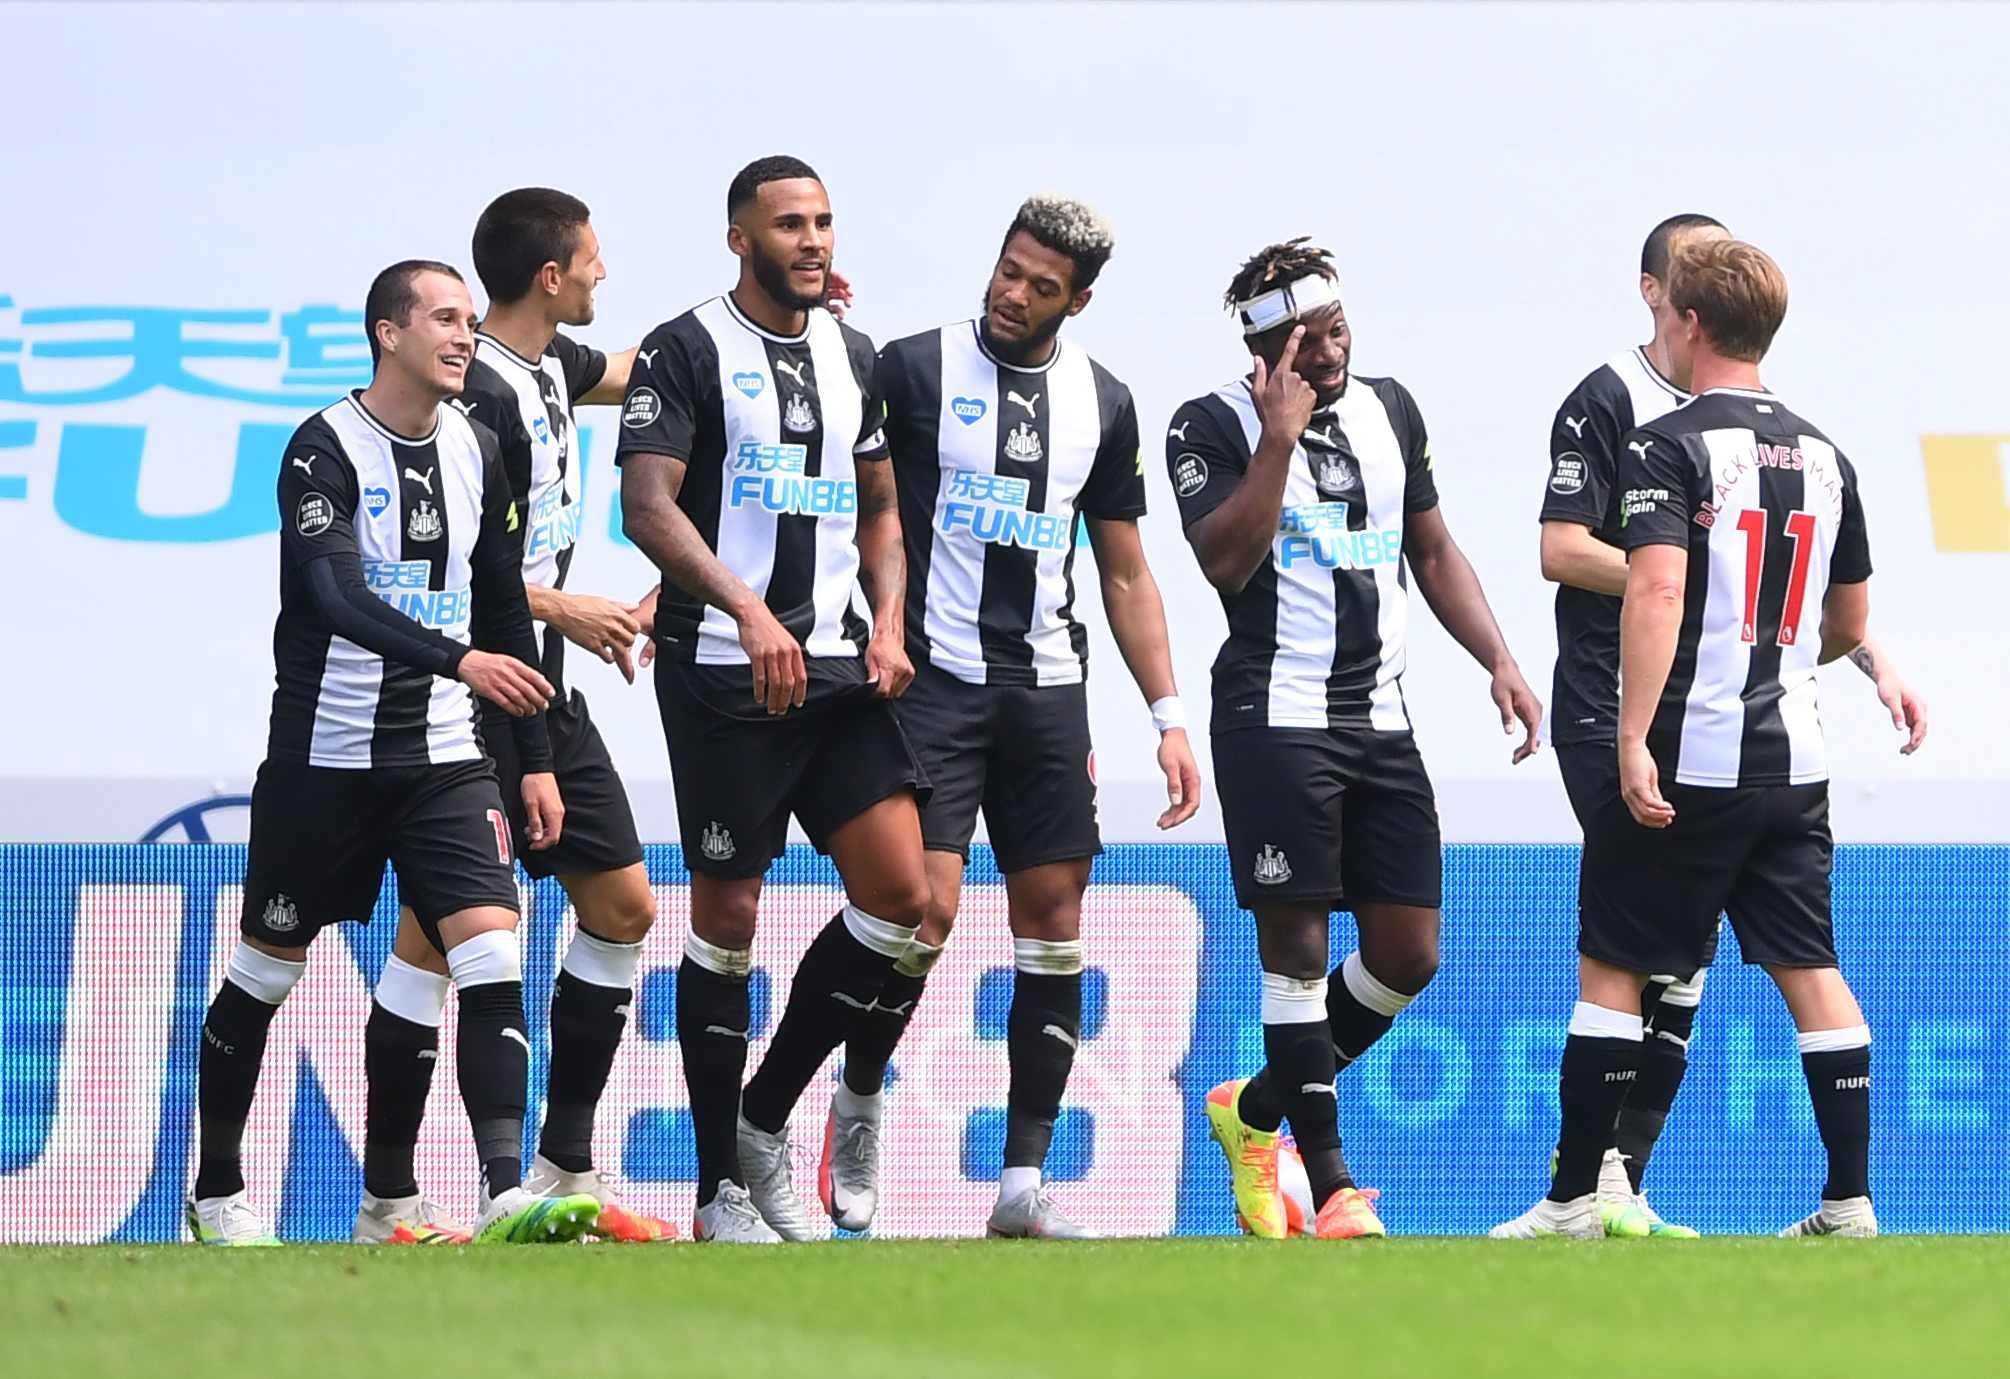 Newcastle United's Joelinton celebrates scoring their third goal with teammates, as play resumes behind closed doors following the outbreak of the coronavirus disease. Photo: Reuters